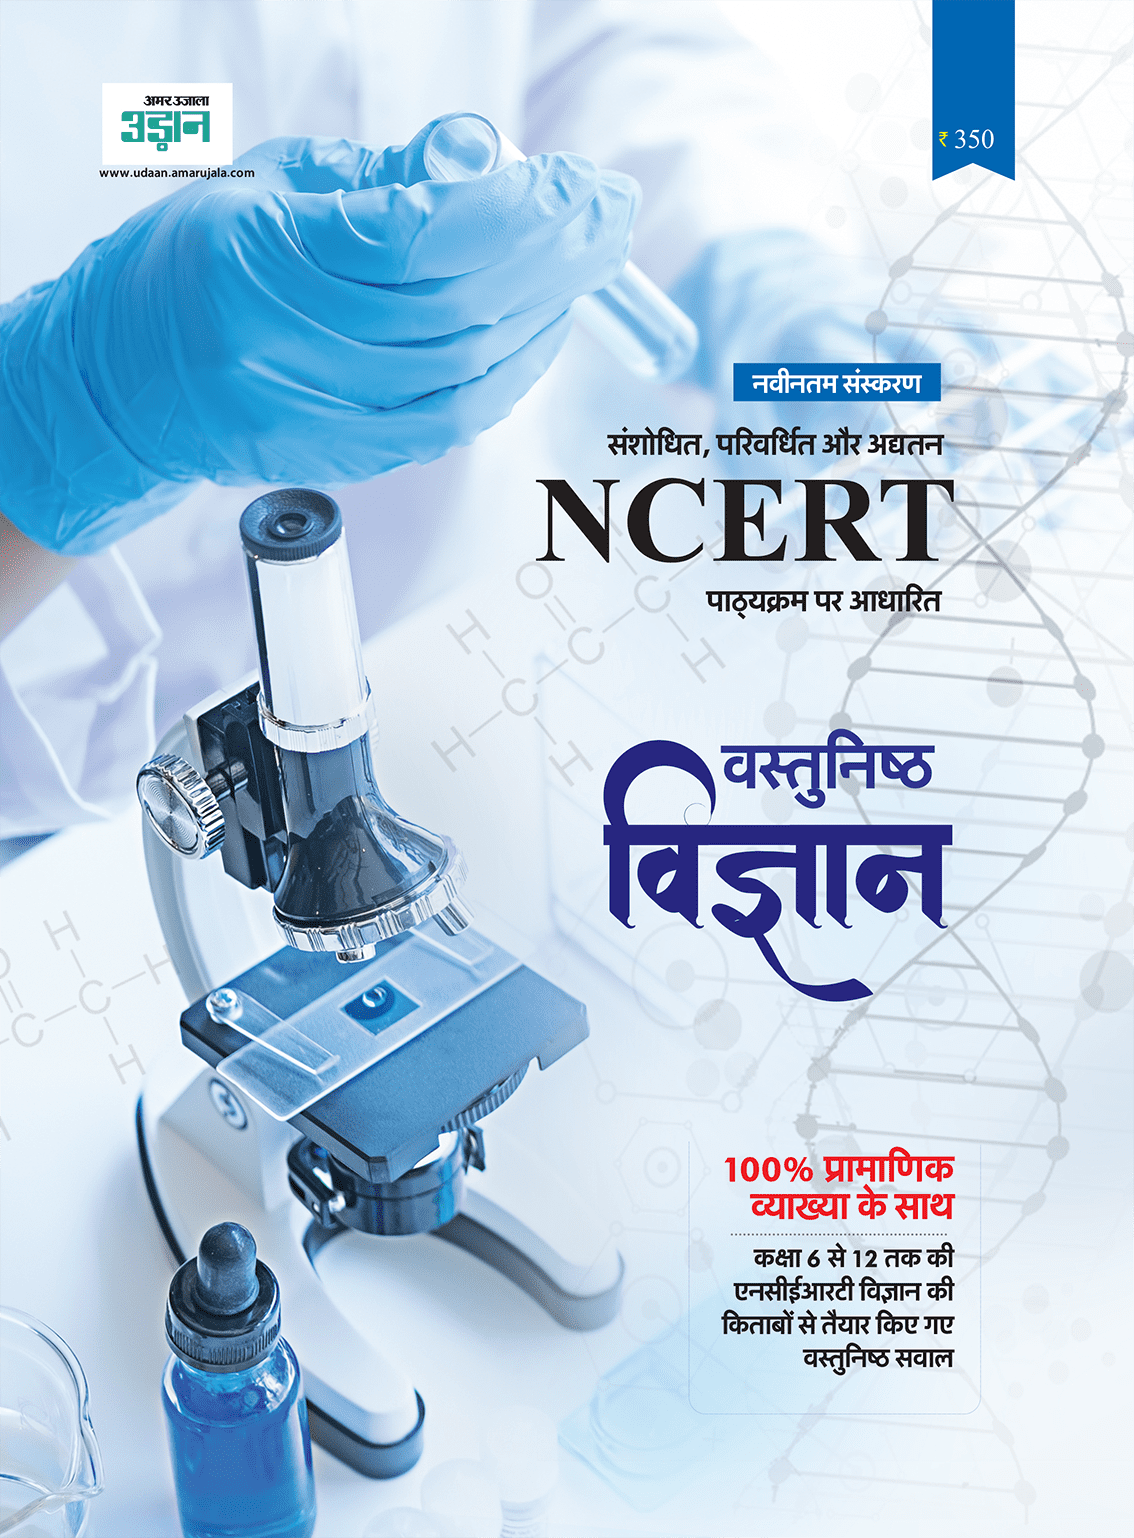 NCERT Science BOOK COVER PAGE